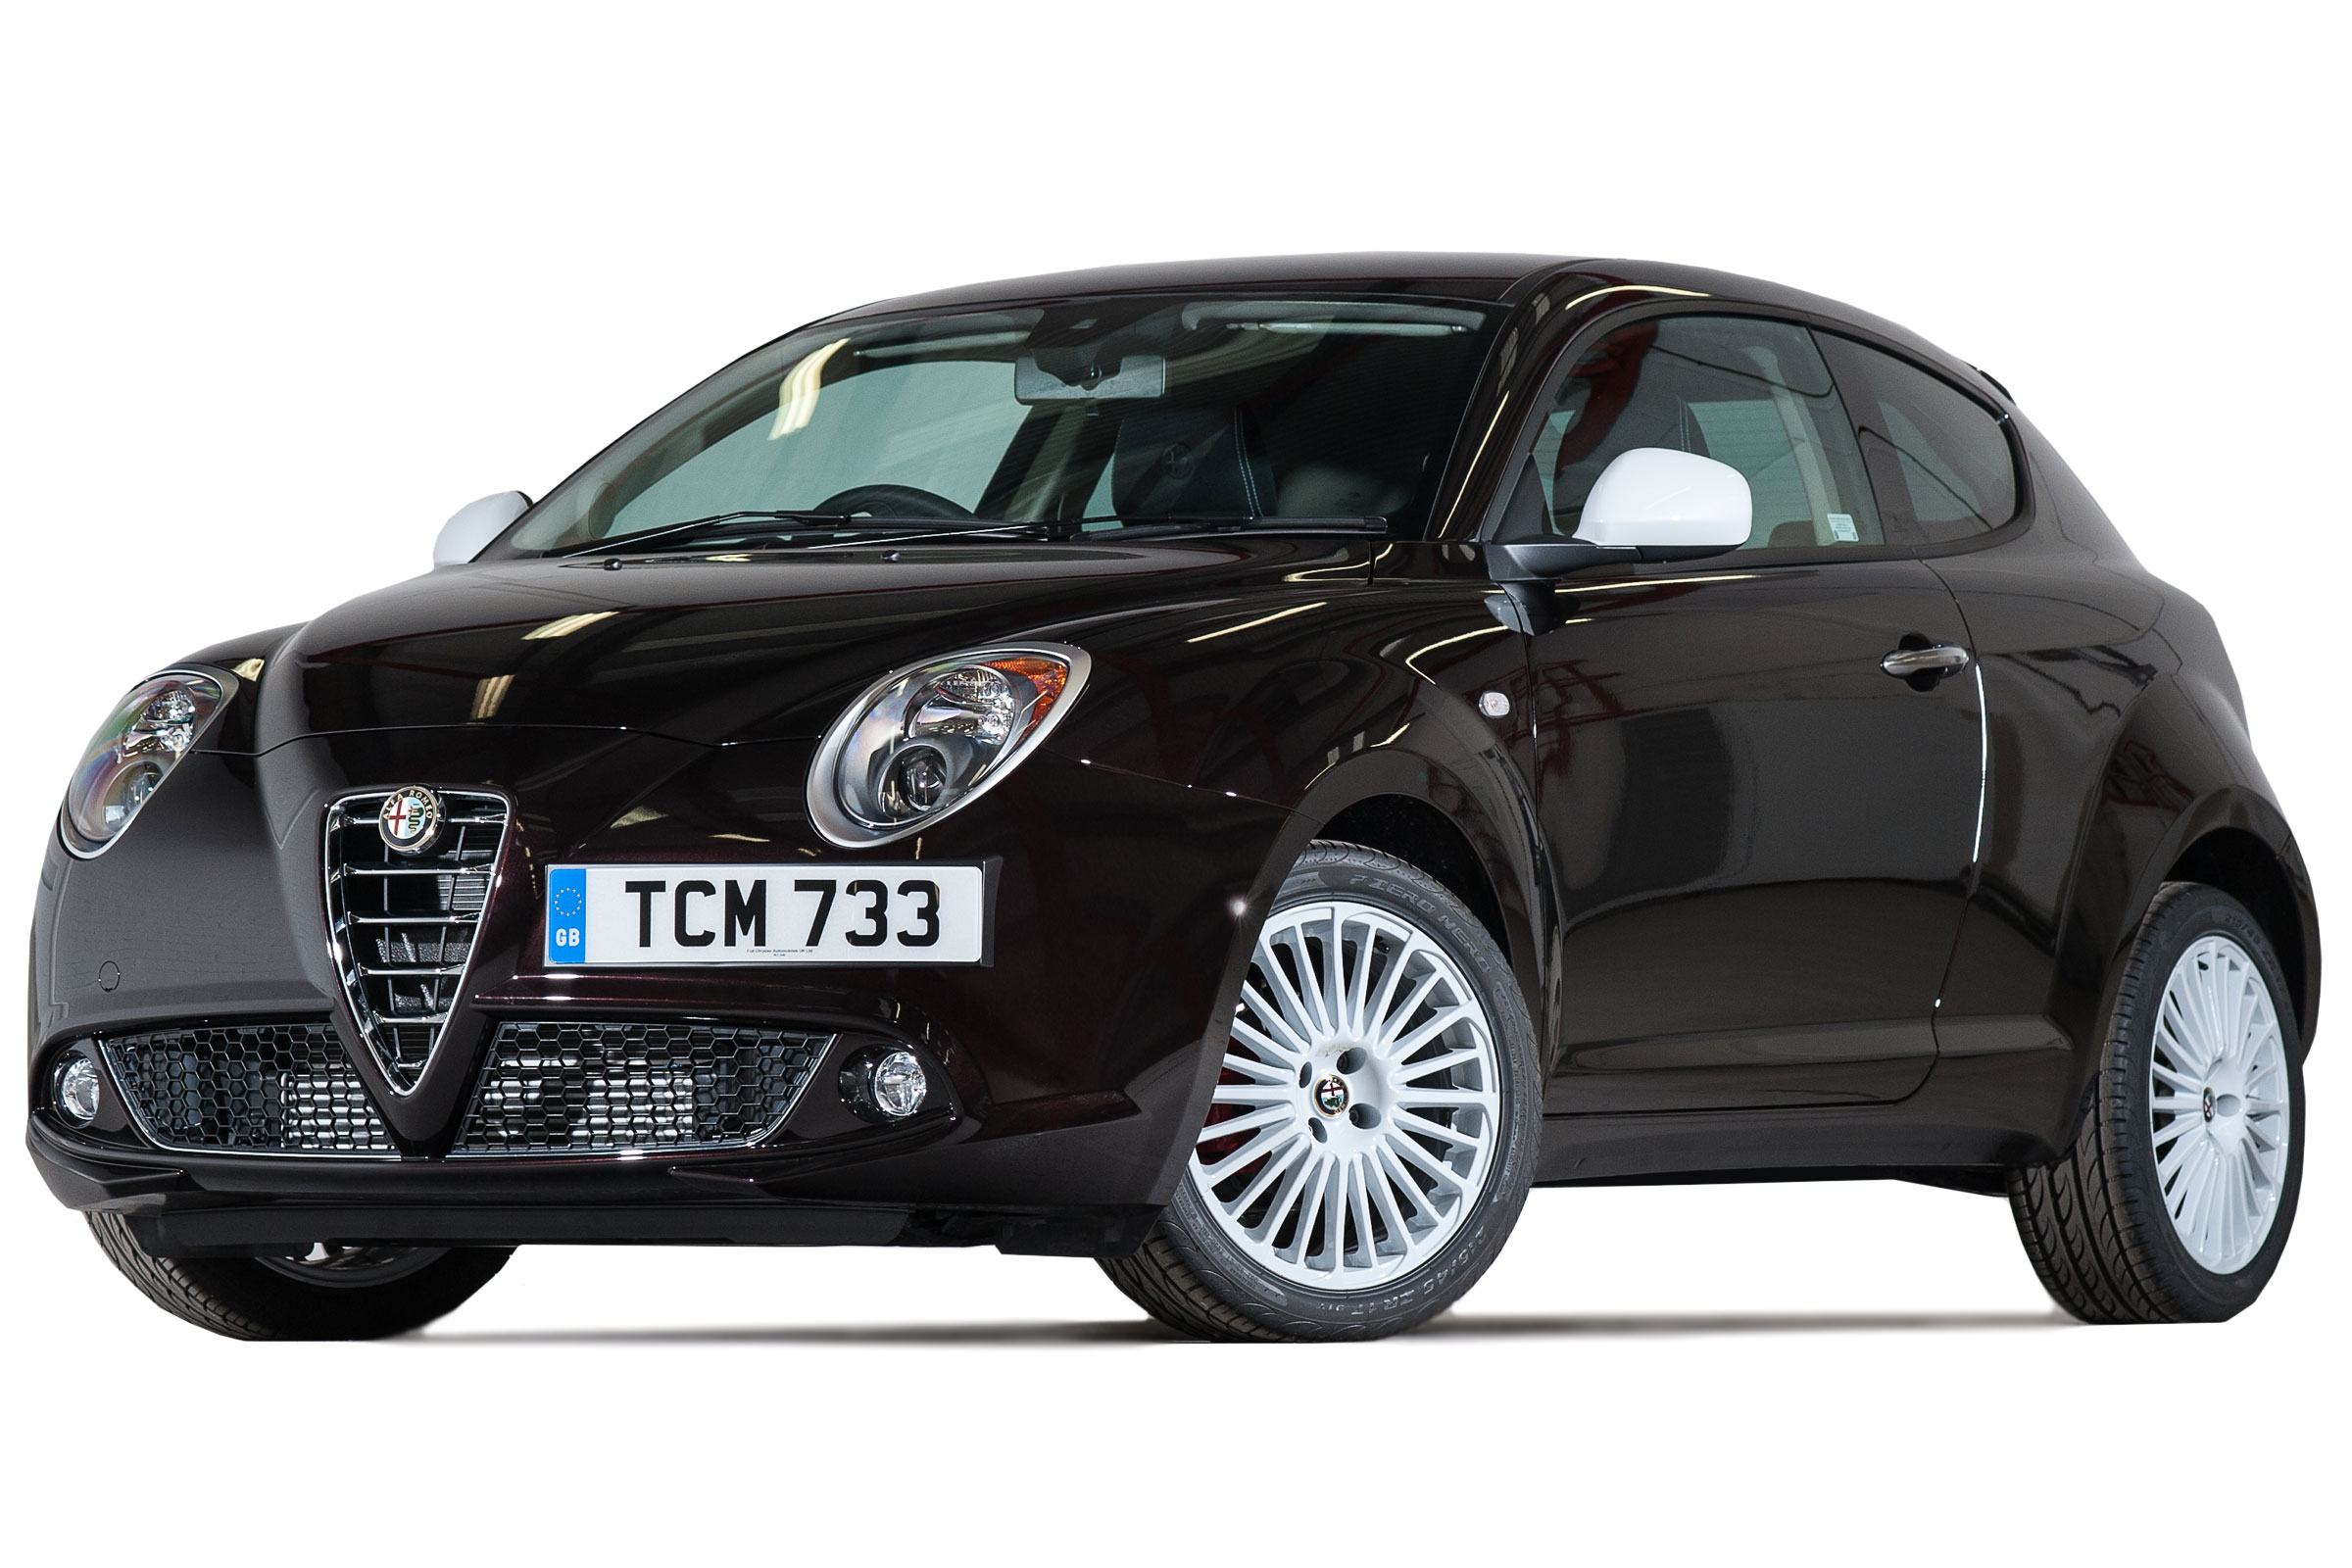 Alfa Romeo Mito Hatchback 08 18 Reliability Safety Carbuyer